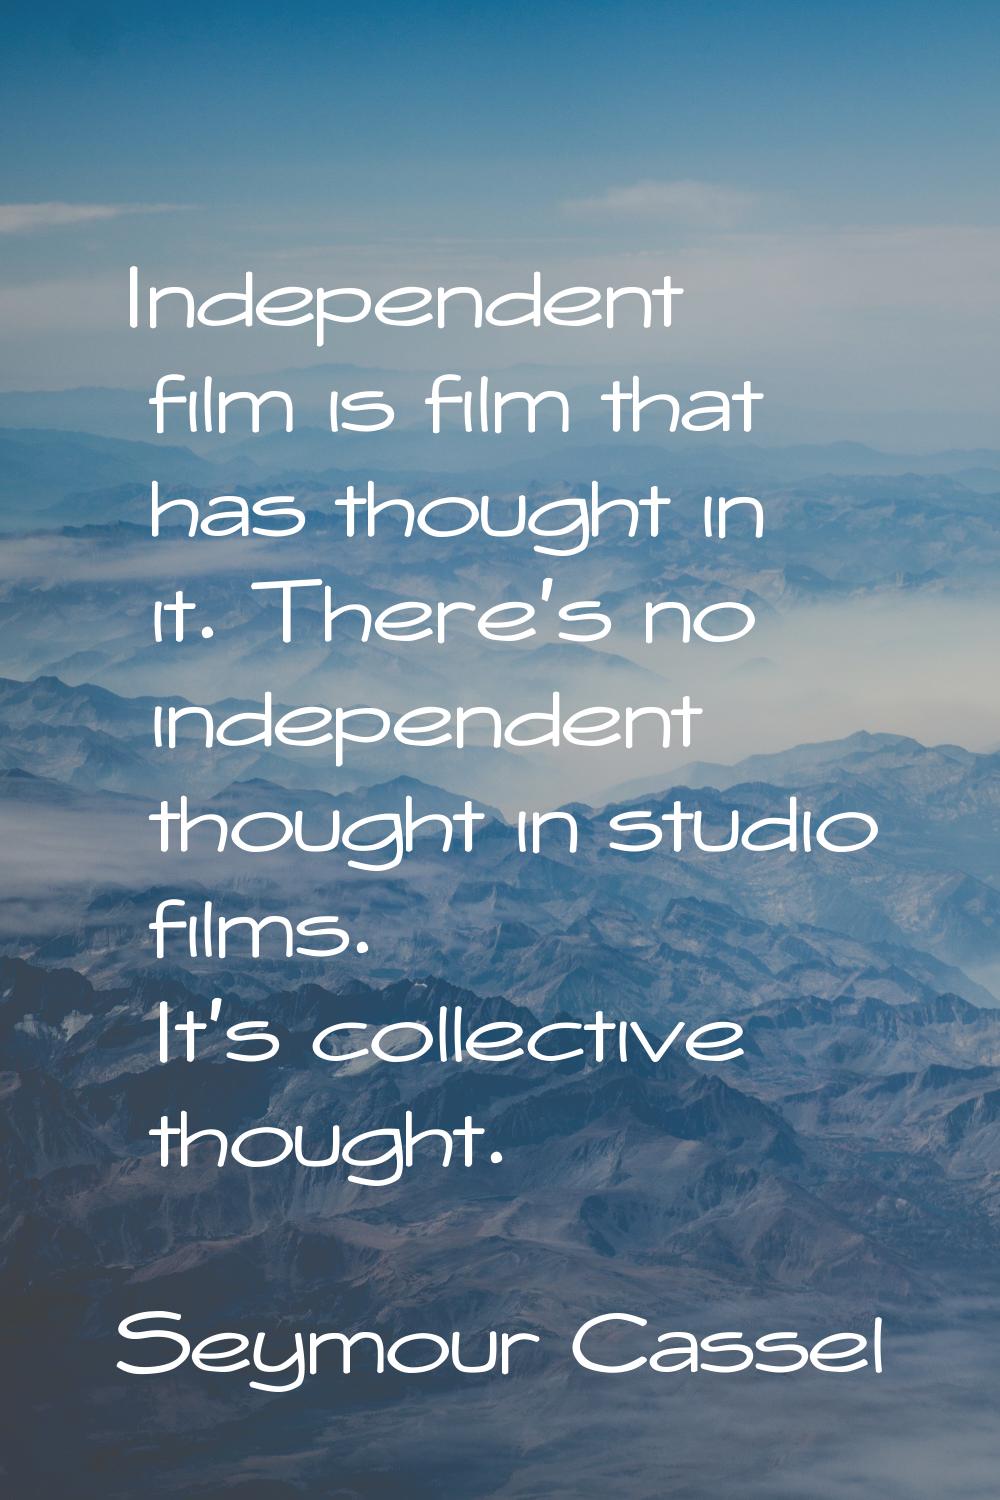 Independent film is film that has thought in it. There's no independent thought in studio films. It